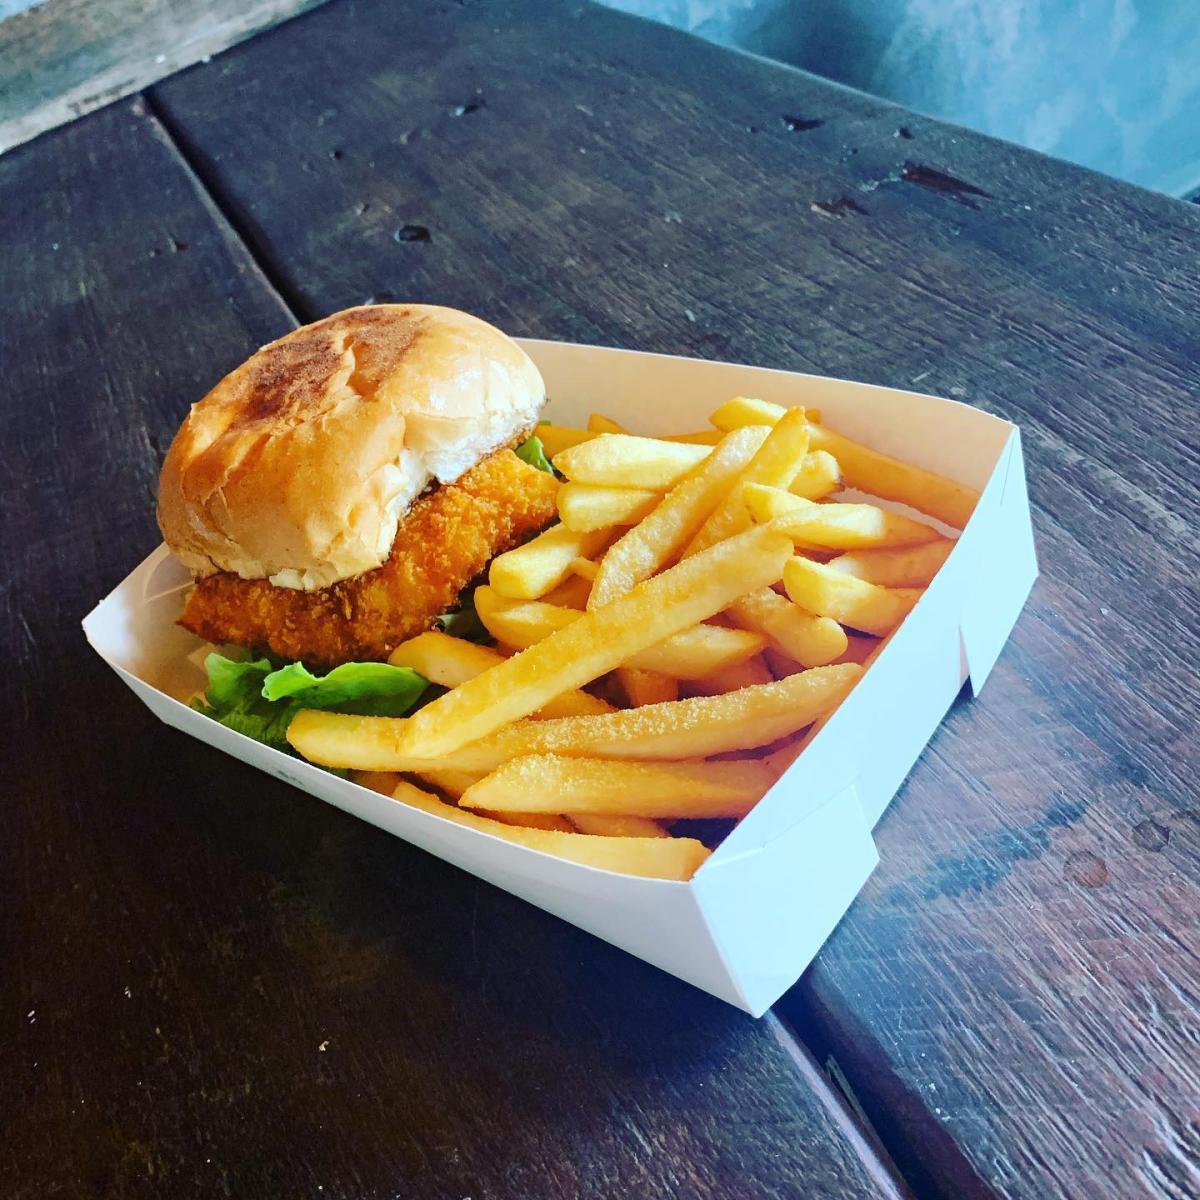 Fish Burger and Chips, Two Wise Fish, Mermaid Waters (image supplied)